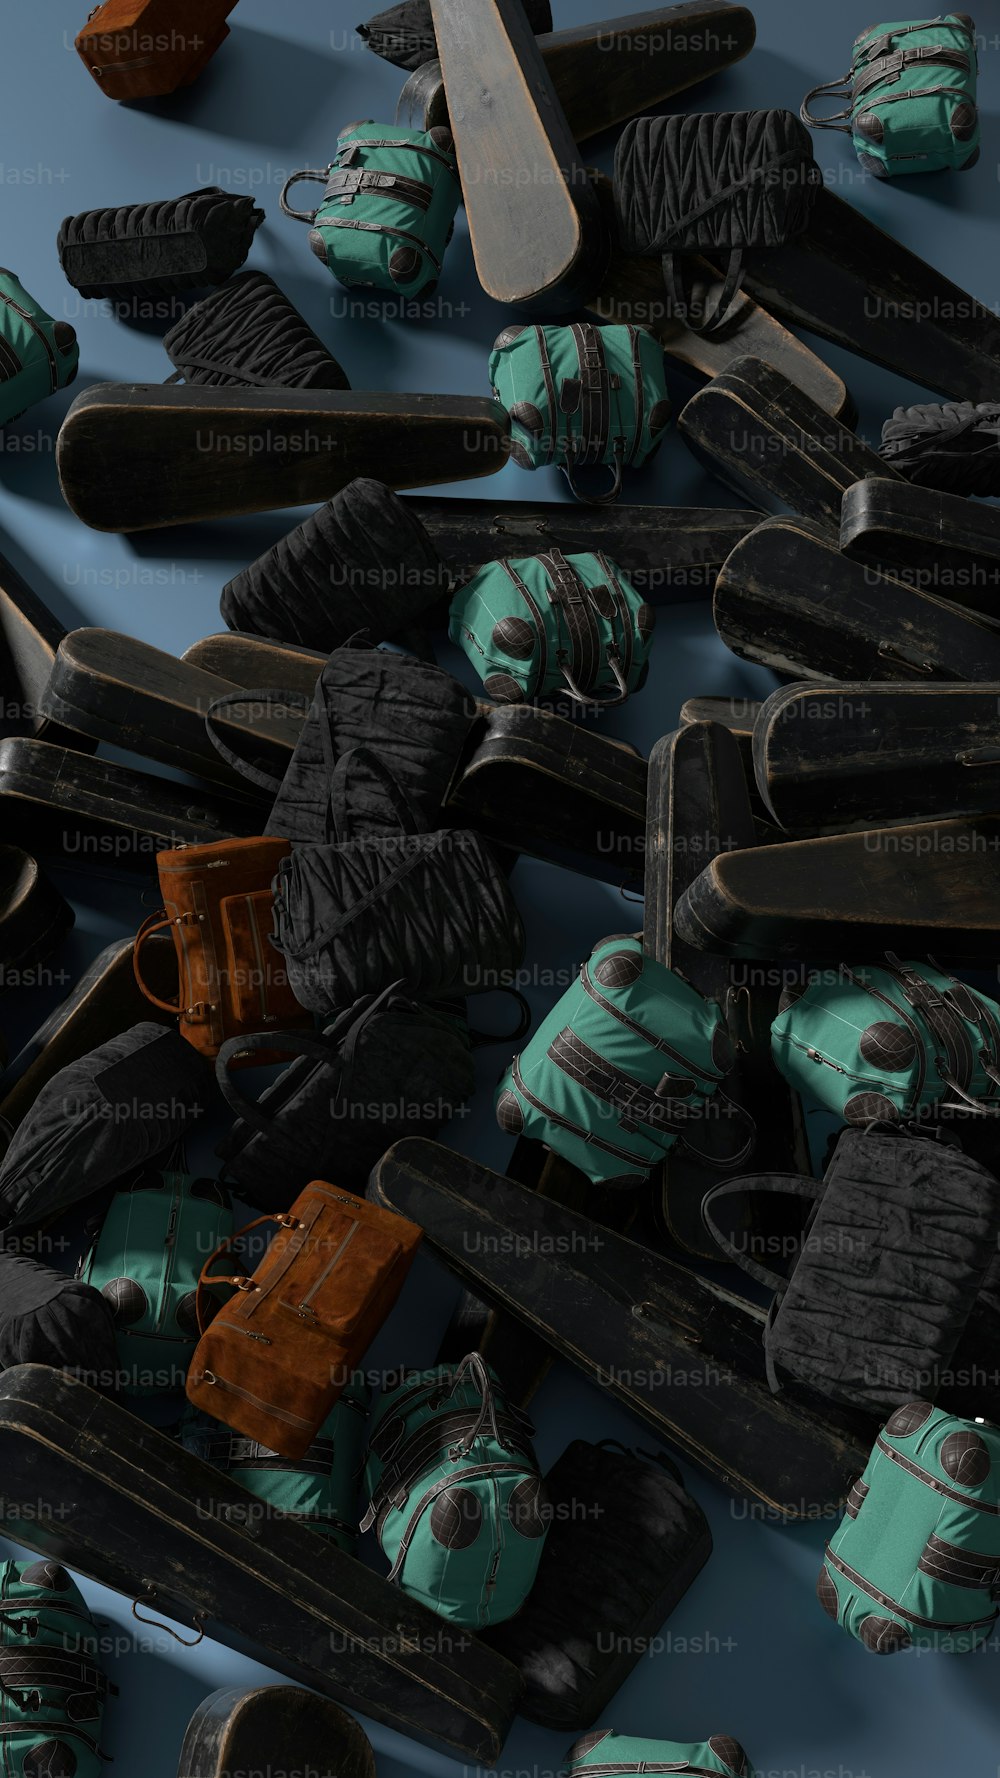 a pile of skis and snow shoes on a blue surface